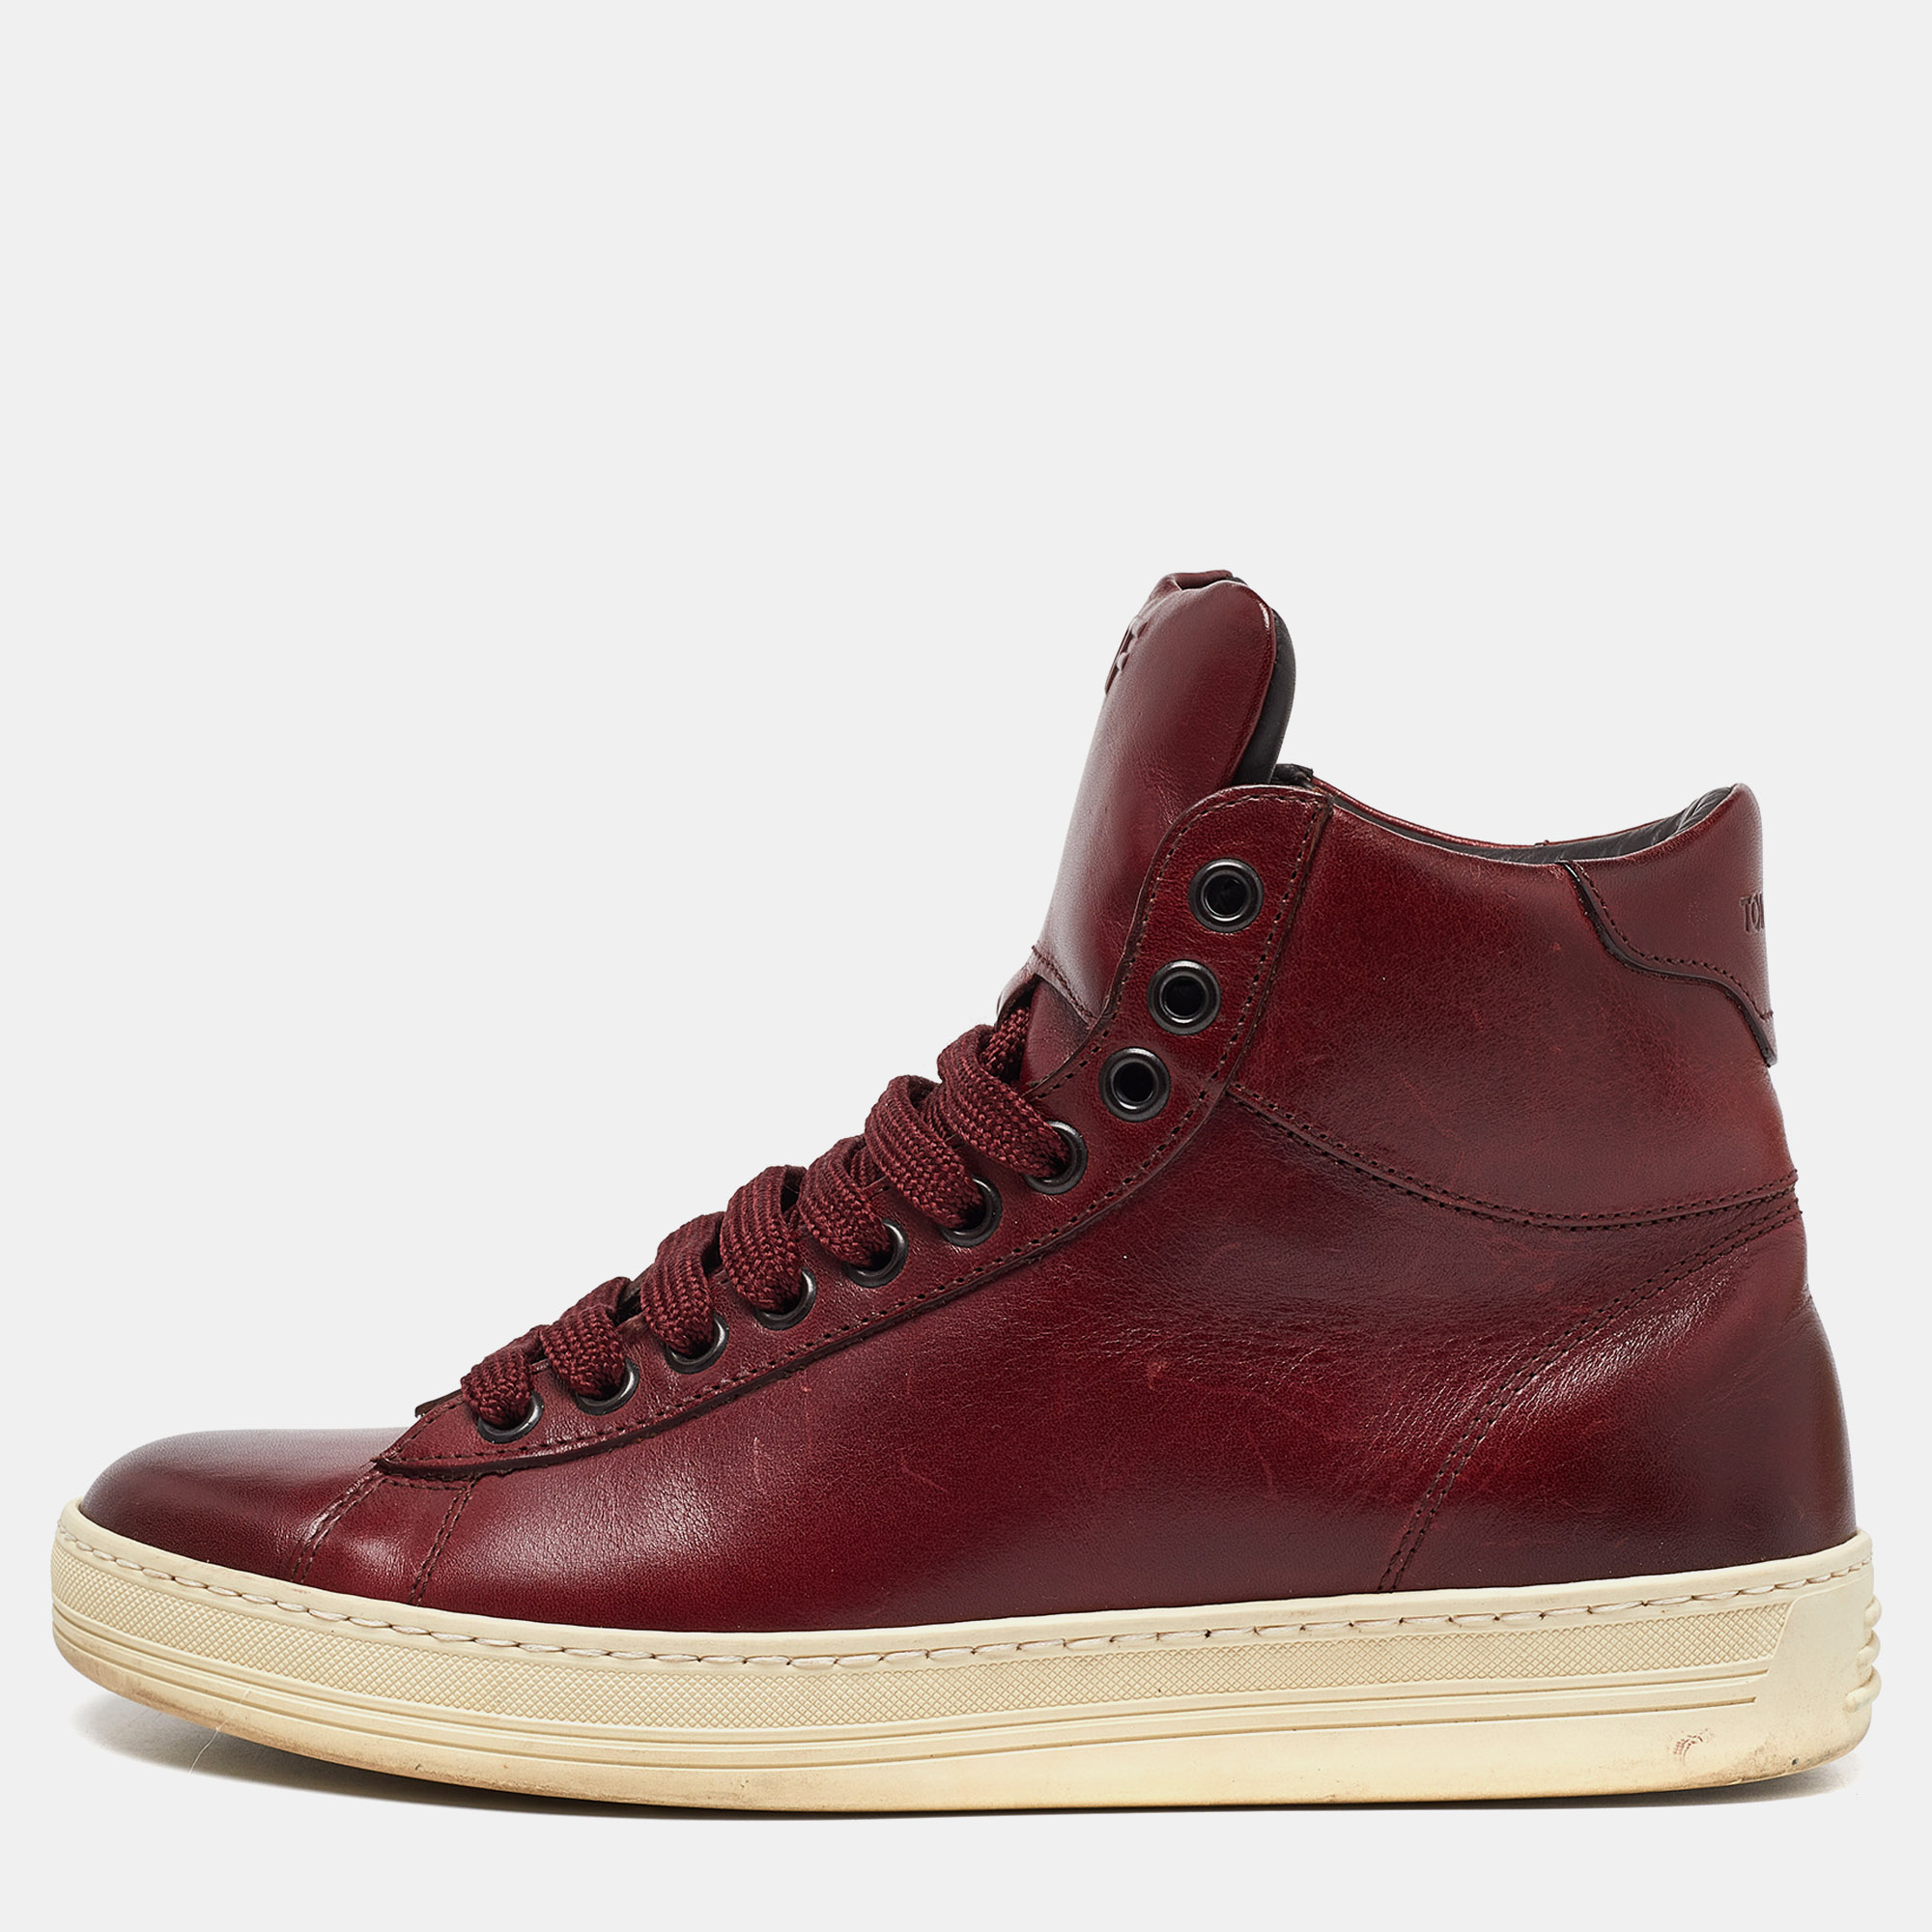 

Tom Ford Burgundy Leather High Top Sneakers Size